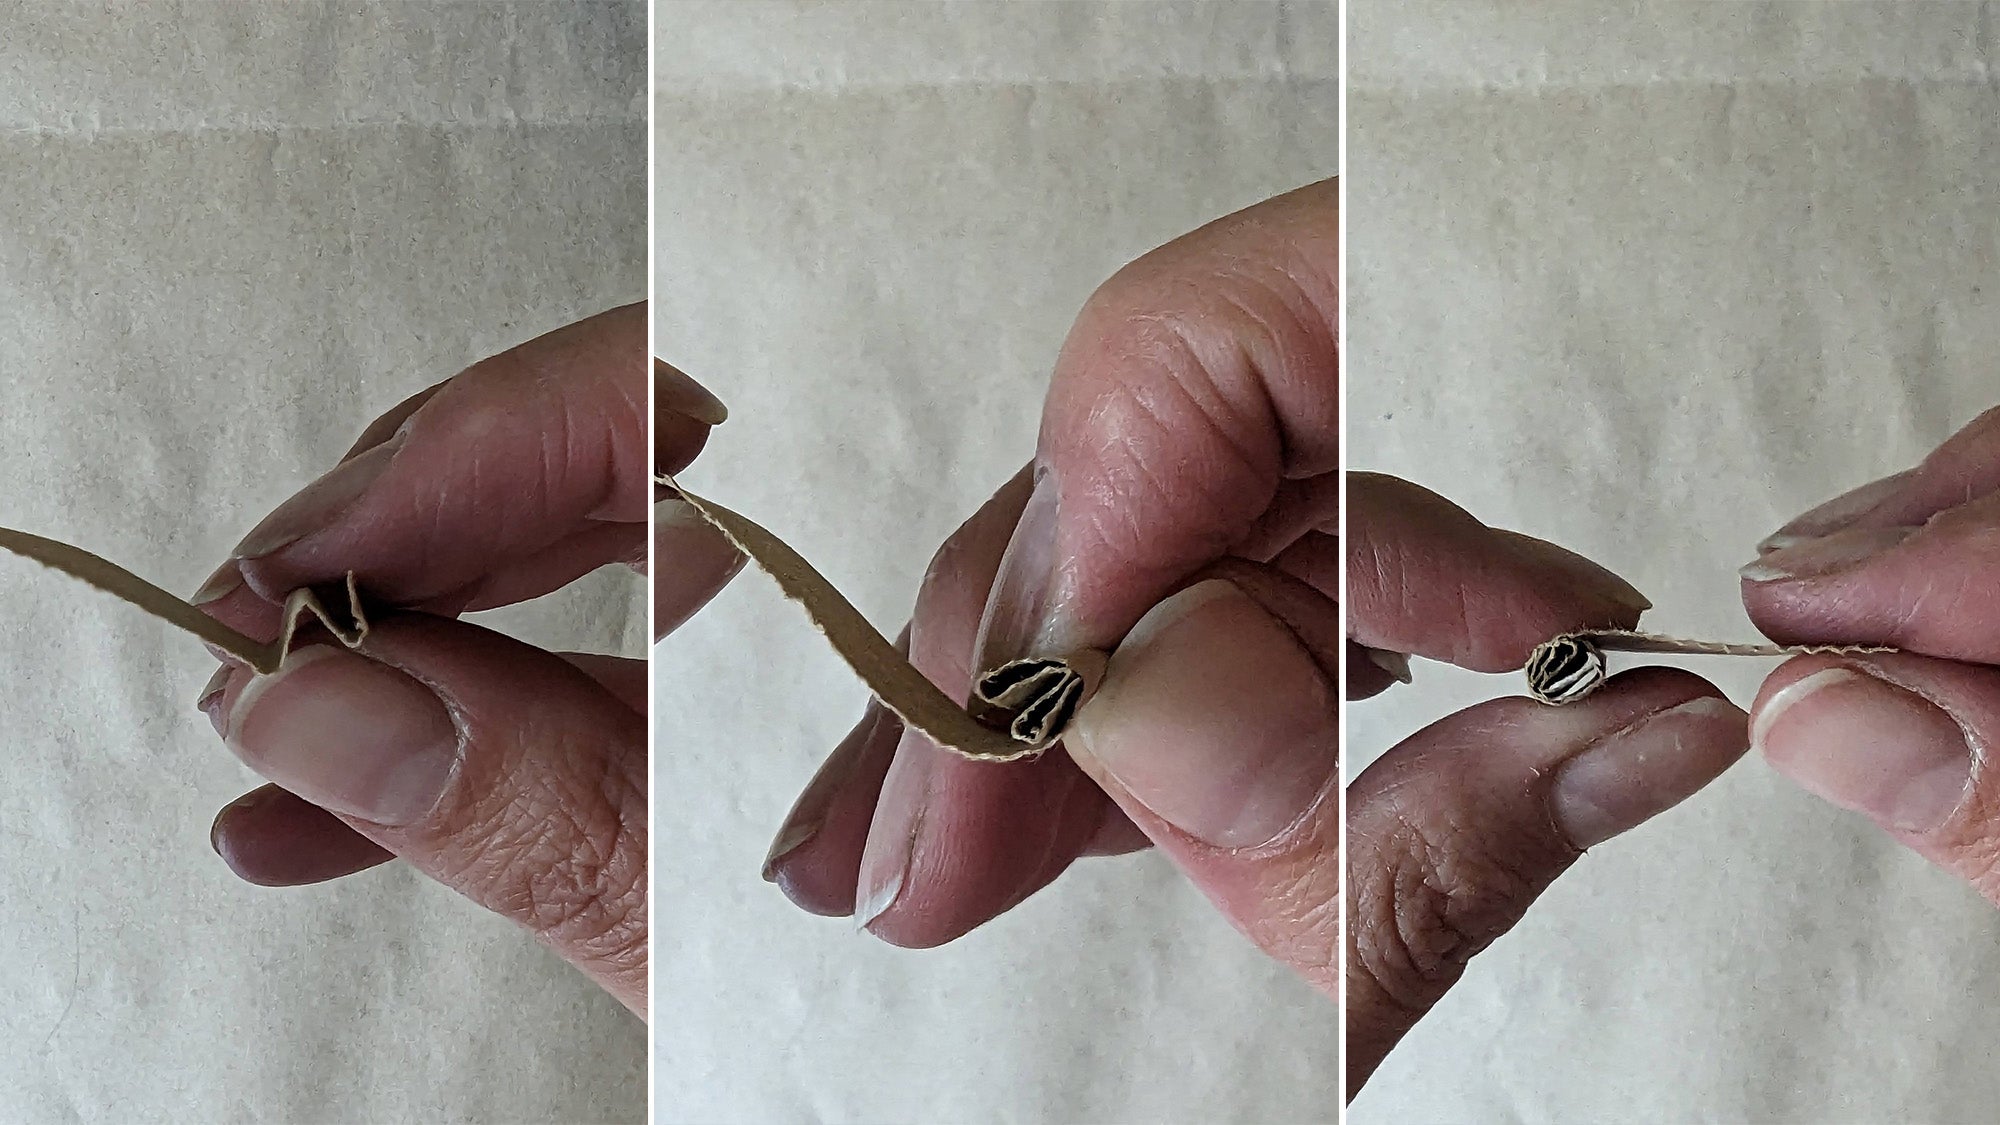 Series of three photos showing hands rolling a smoking tip out of cardboard.